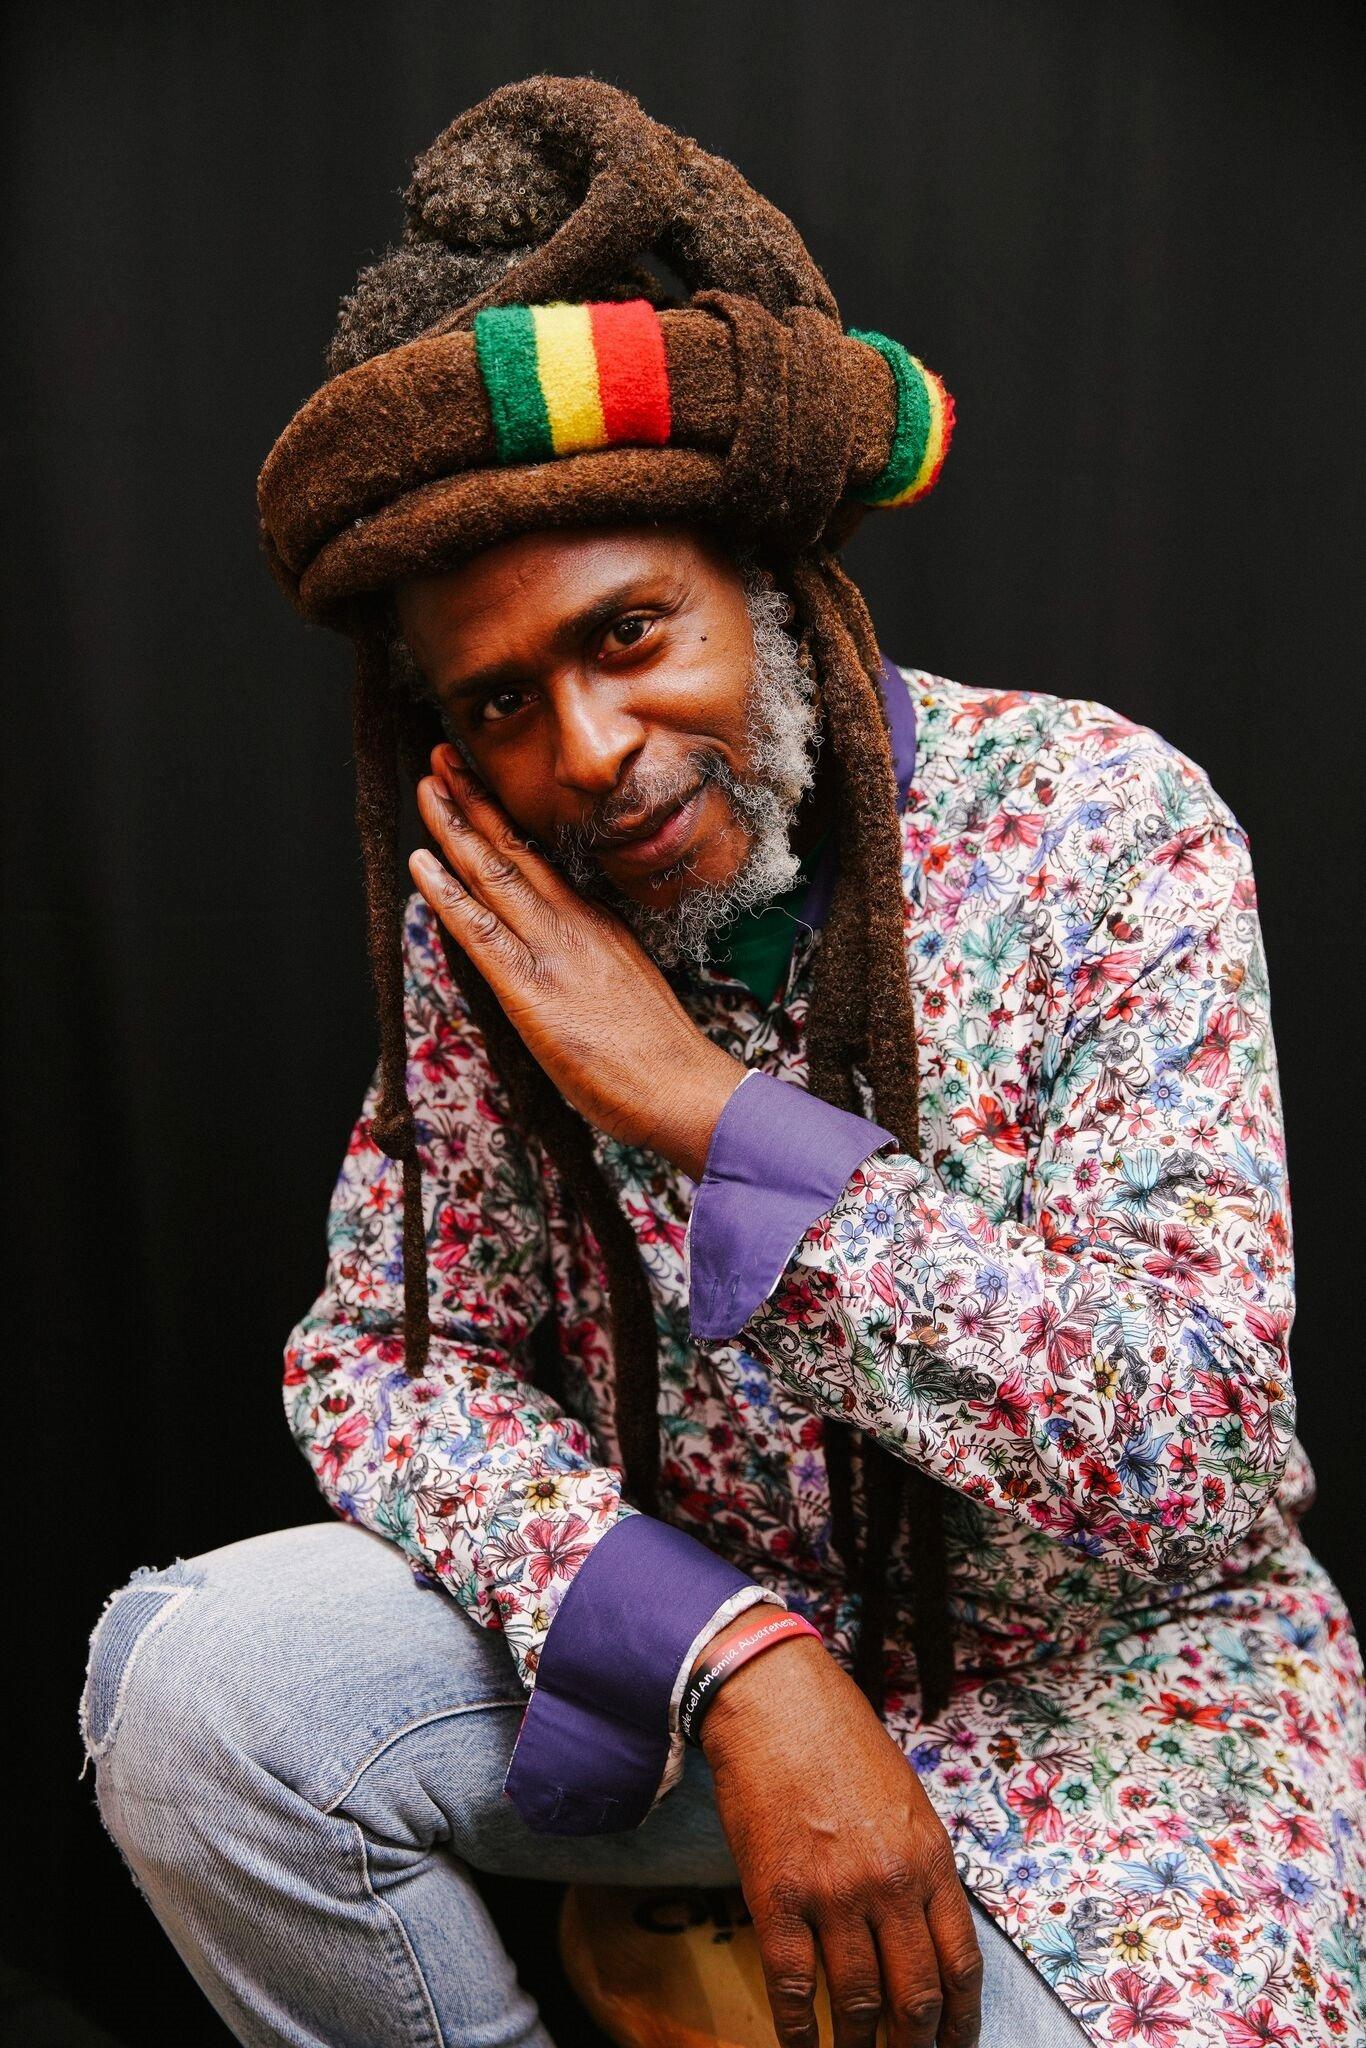 Steel Pulse's David Hinds On Social Change, Movies & The Band's